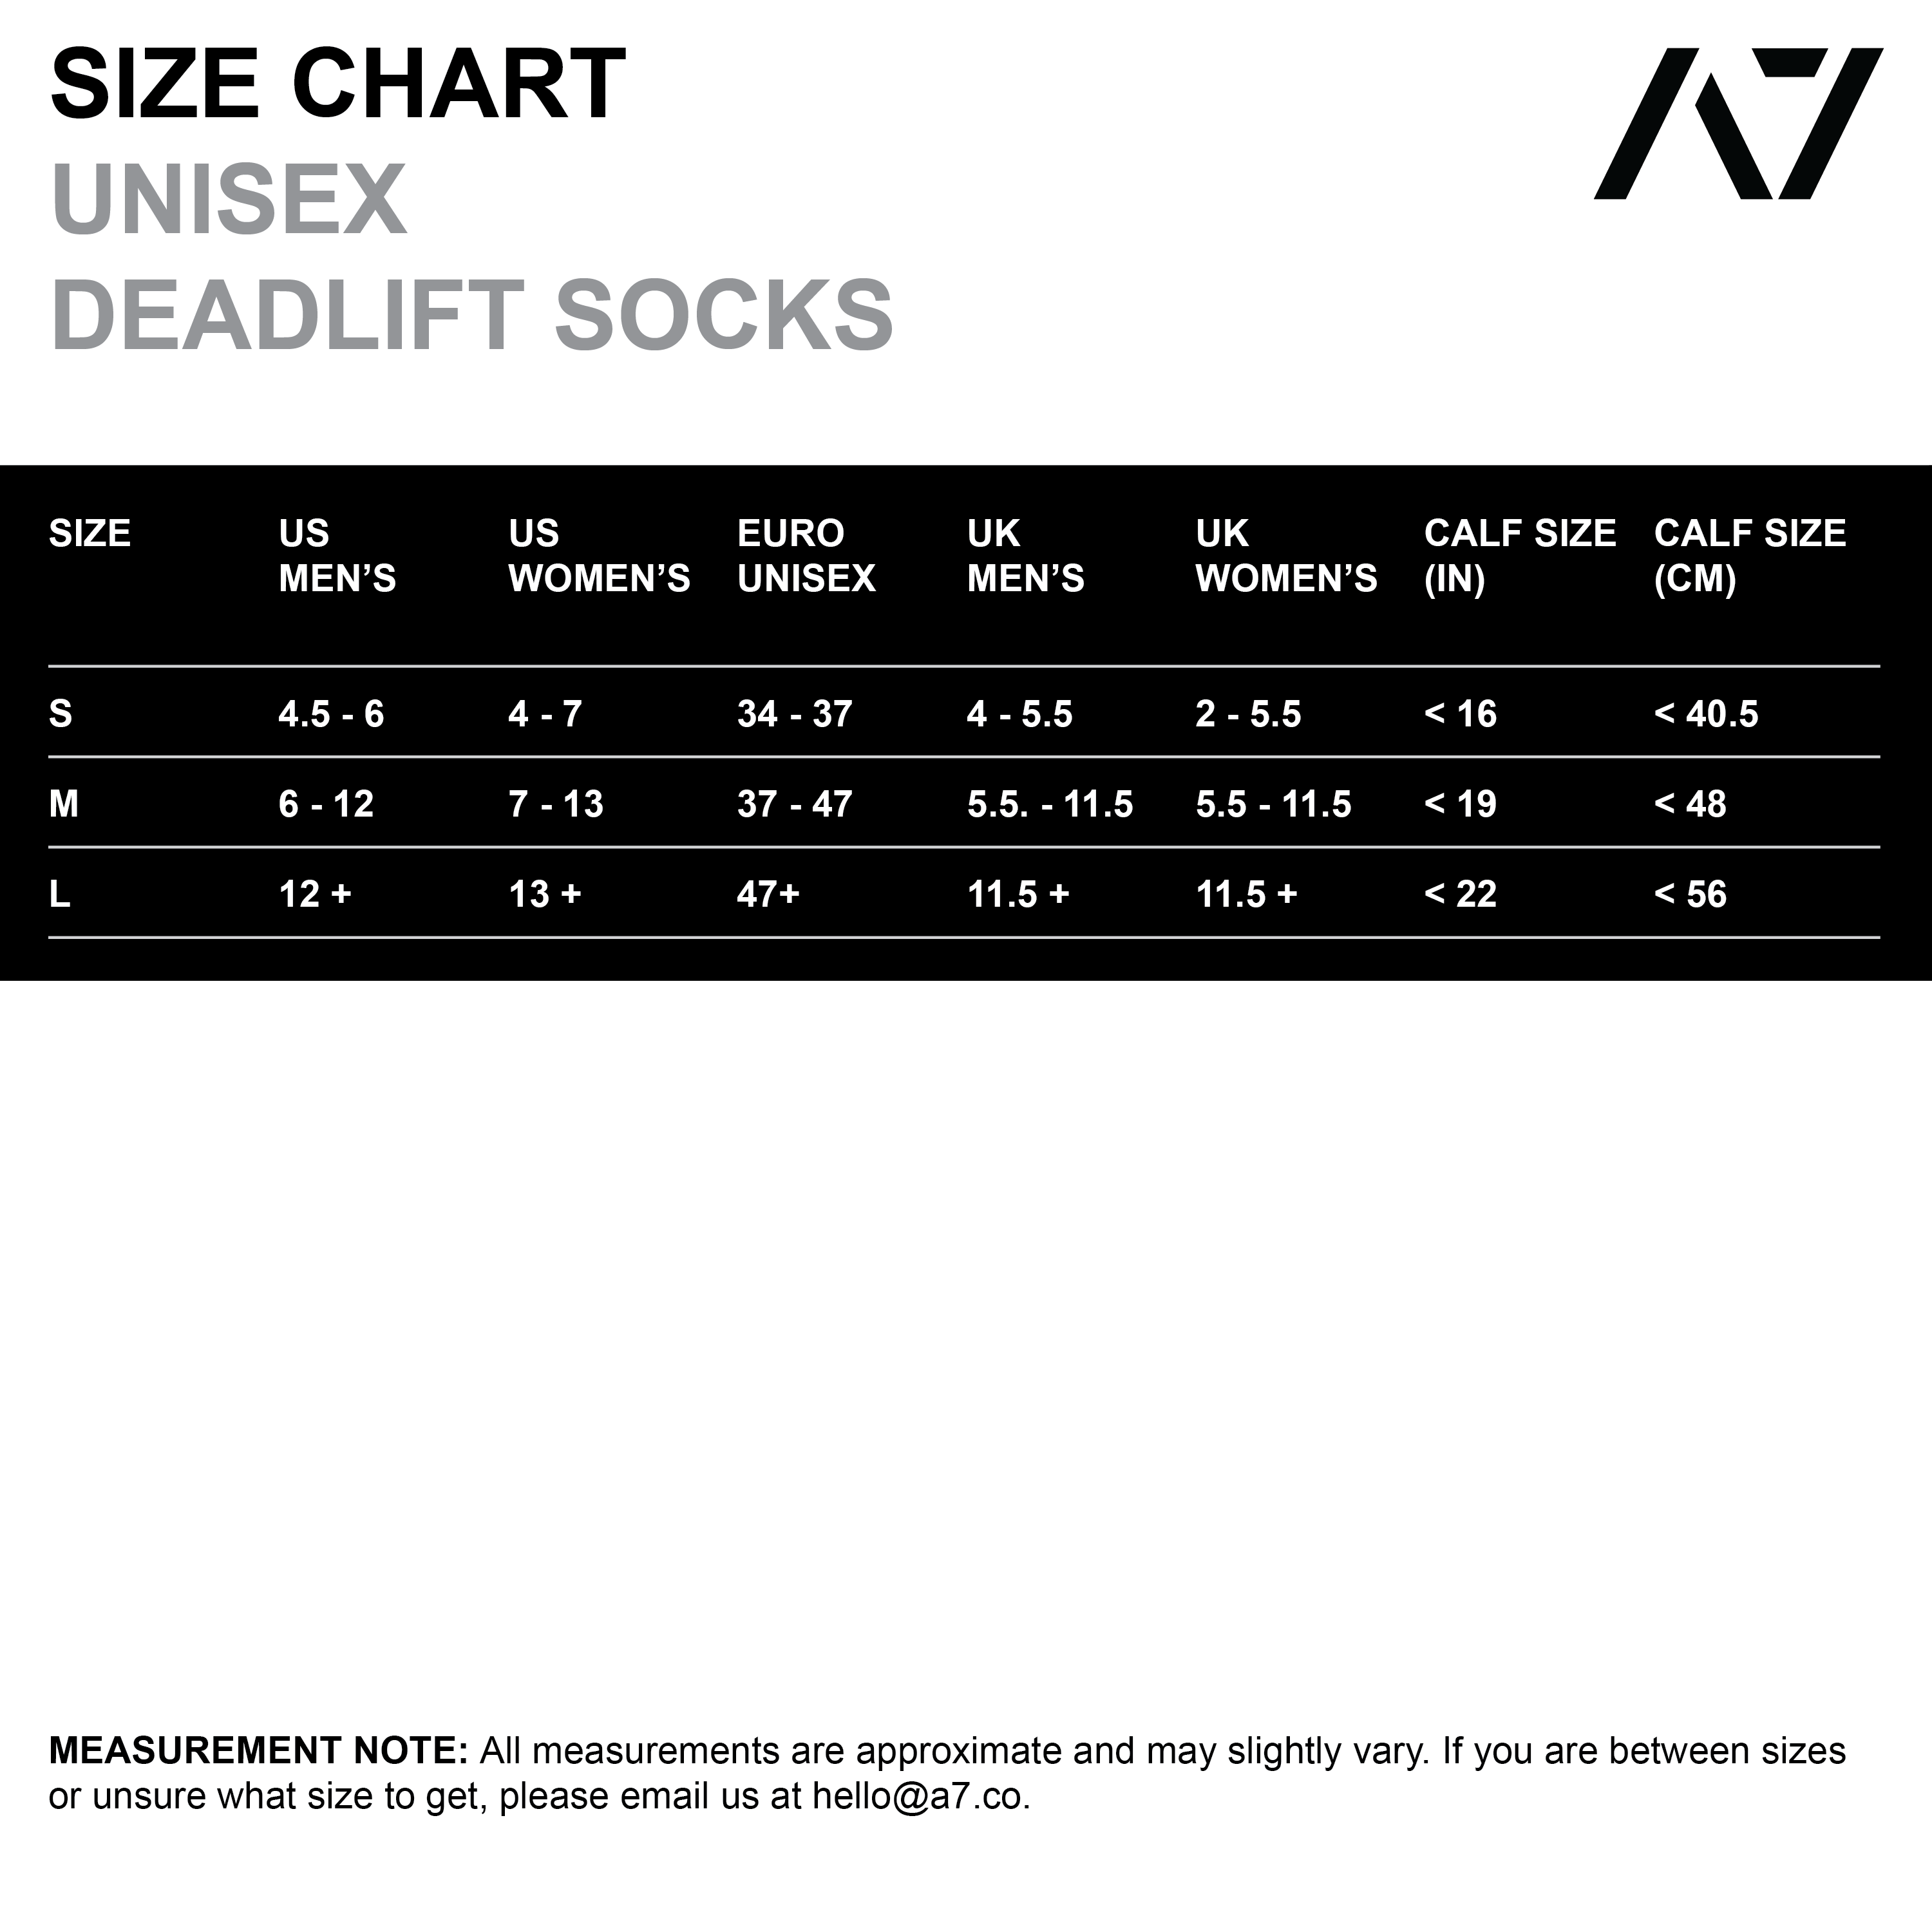 A7 Ivory Rose deadlift socks are designed specifically for pulls and keep your shins protected from scrapes. A7 deadlift socks are a perfect pair to wear in training or powerlifting competition. The A7 IPF Approved Kit includes Powerlifting Singlet, A7 Meet Shirt, A7 Zebra Wrist Wraps, A7 Deadlift Socks, Hourglass Knee Sleeves (Stiff Knee Sleeves and Rigor Mortis Knee Sleeves). Genouill�res powerlifting shipping to France, Spain, Ireland, Germany, Italy, Sweden and EU.